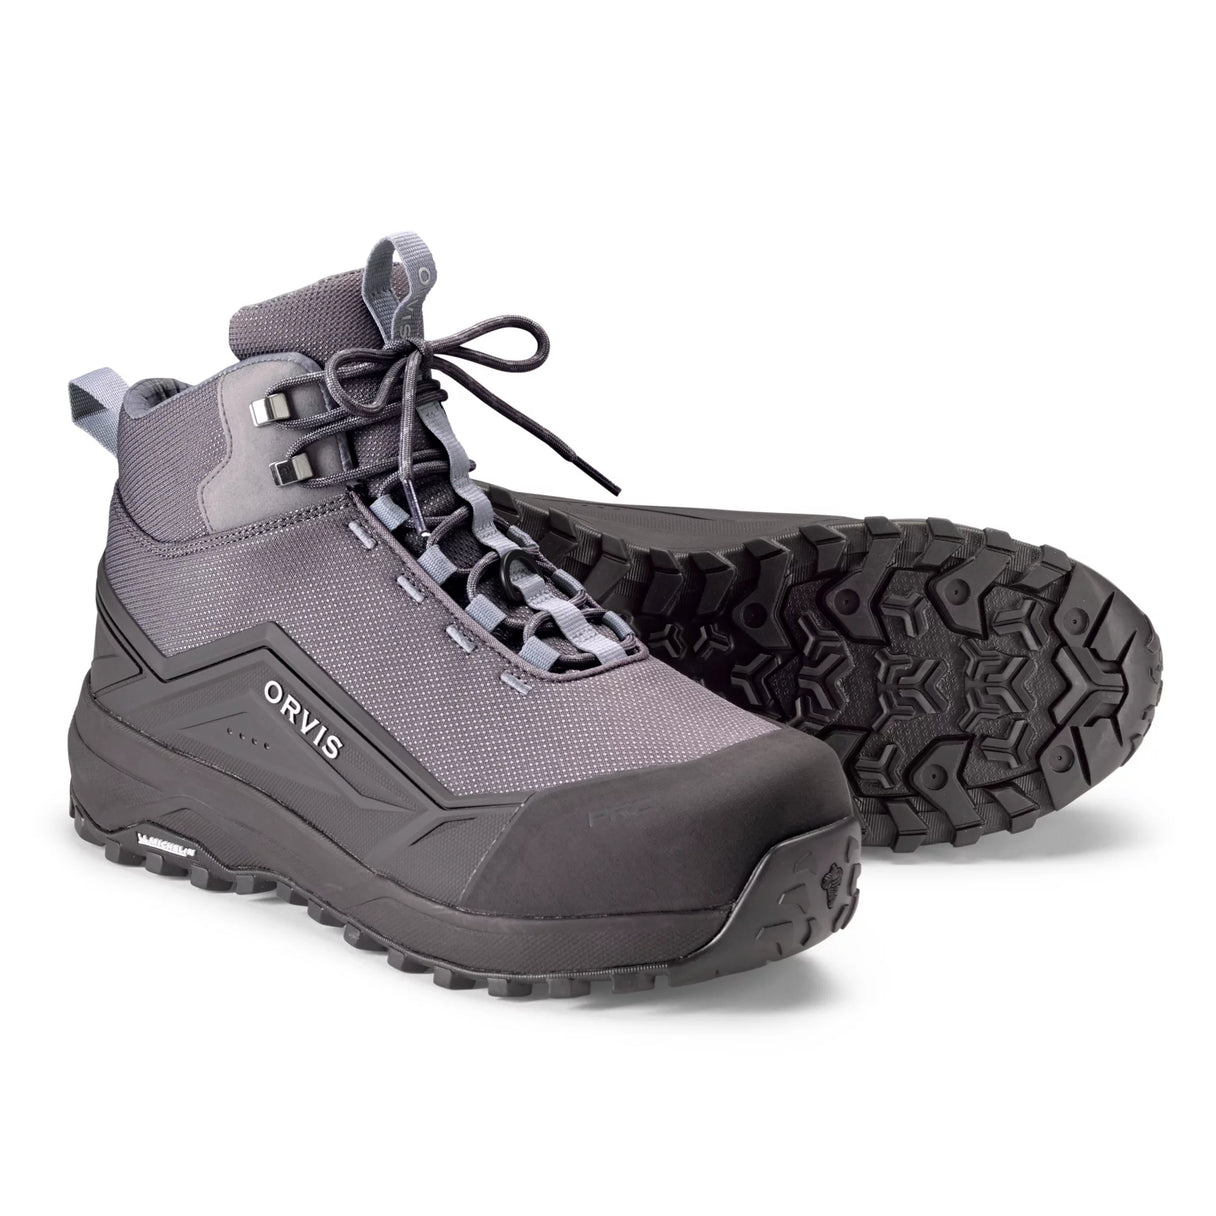 Orvis Pro LT Wading Boot - Rubber 12